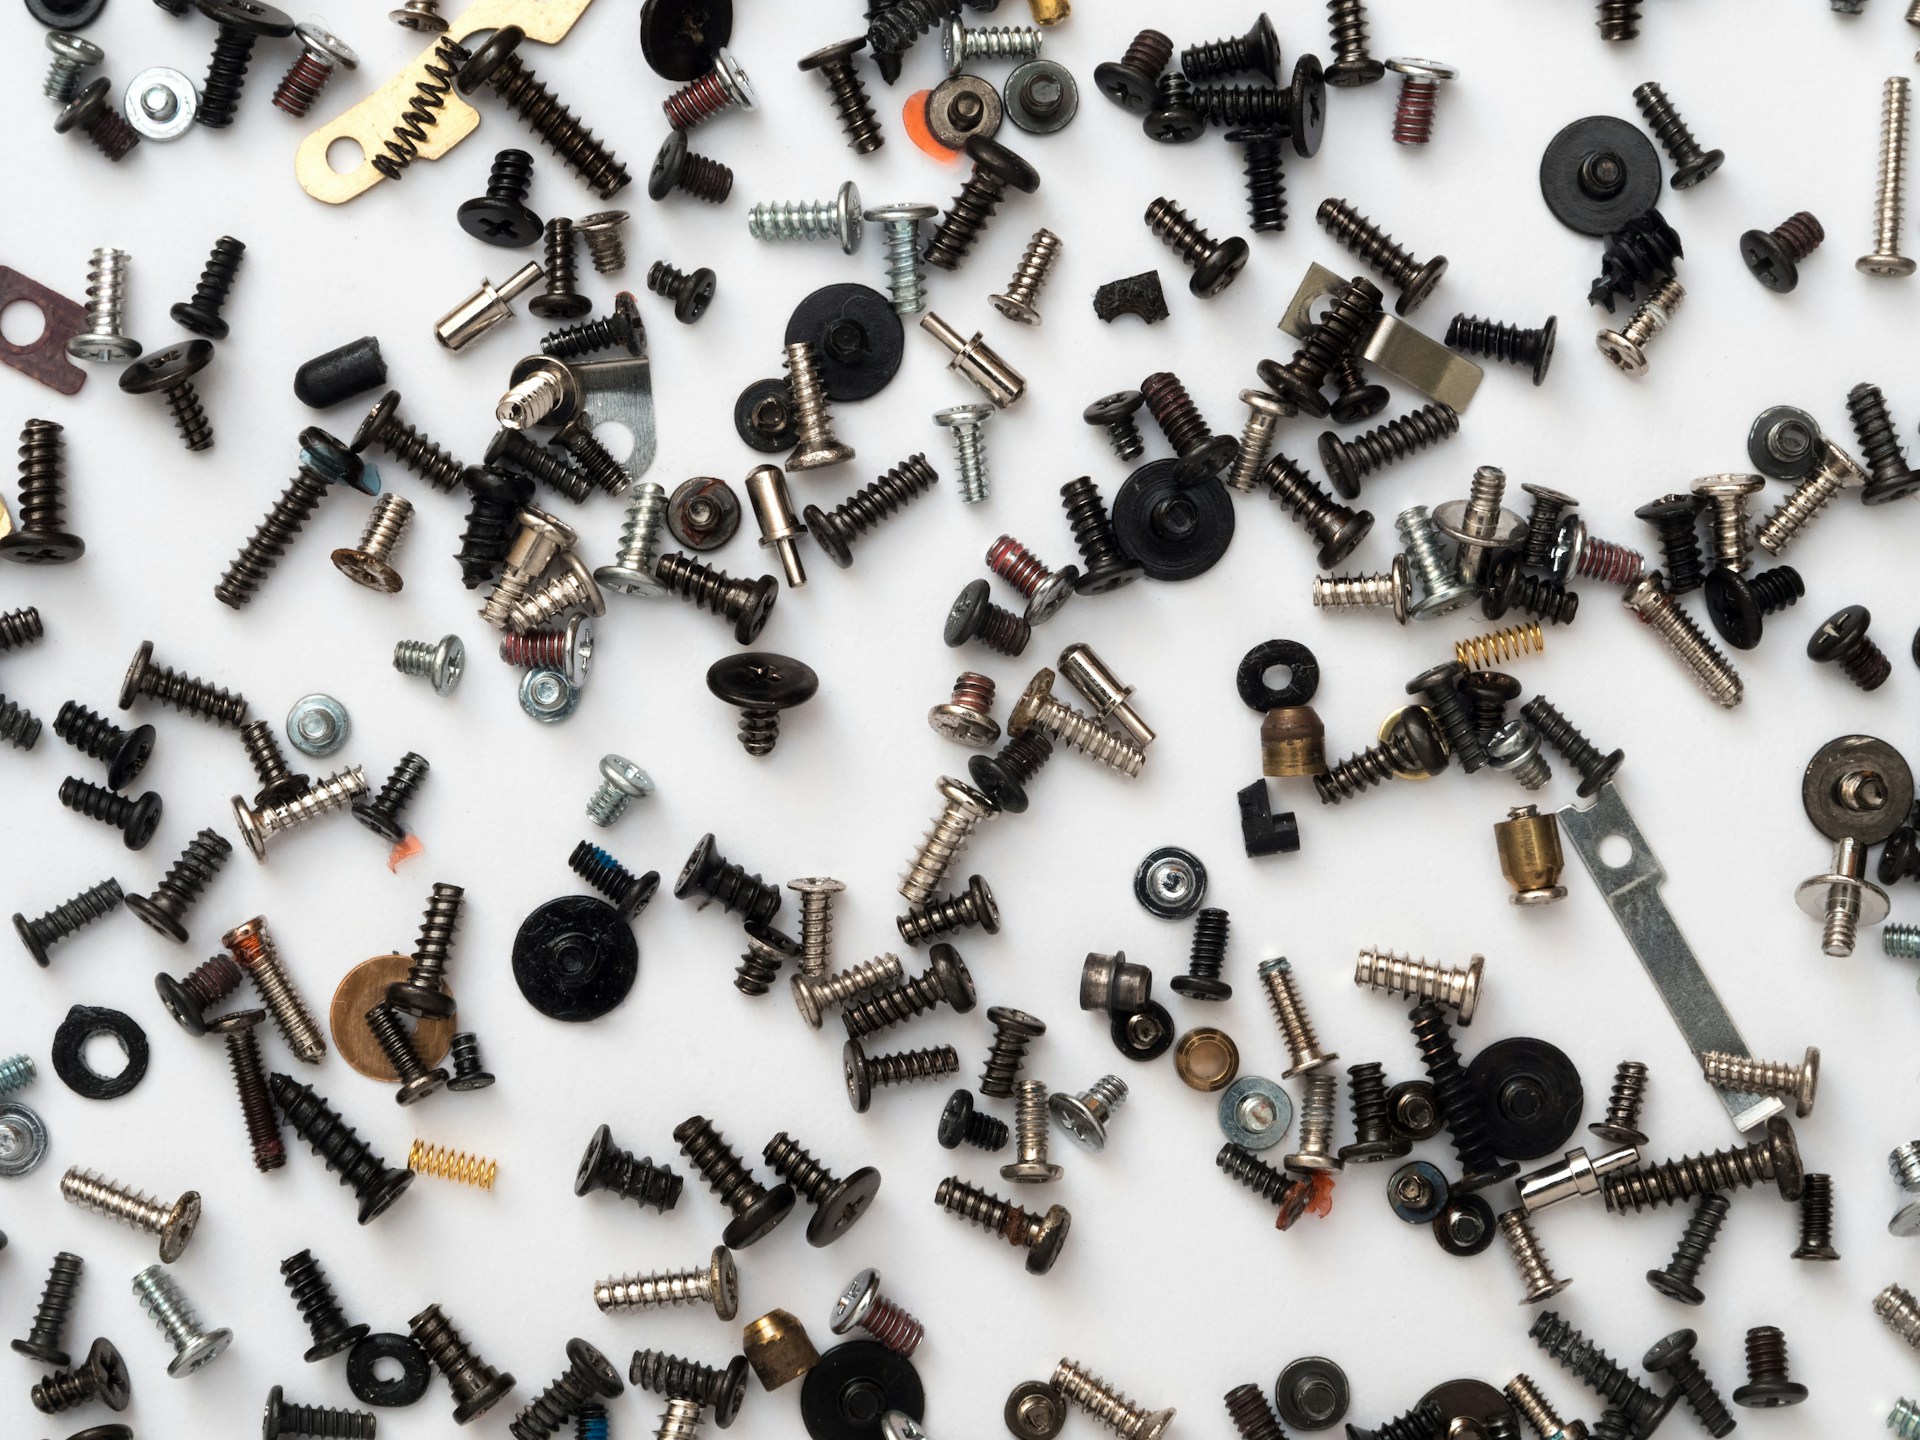 many multicolored fasteners laid out on a white background